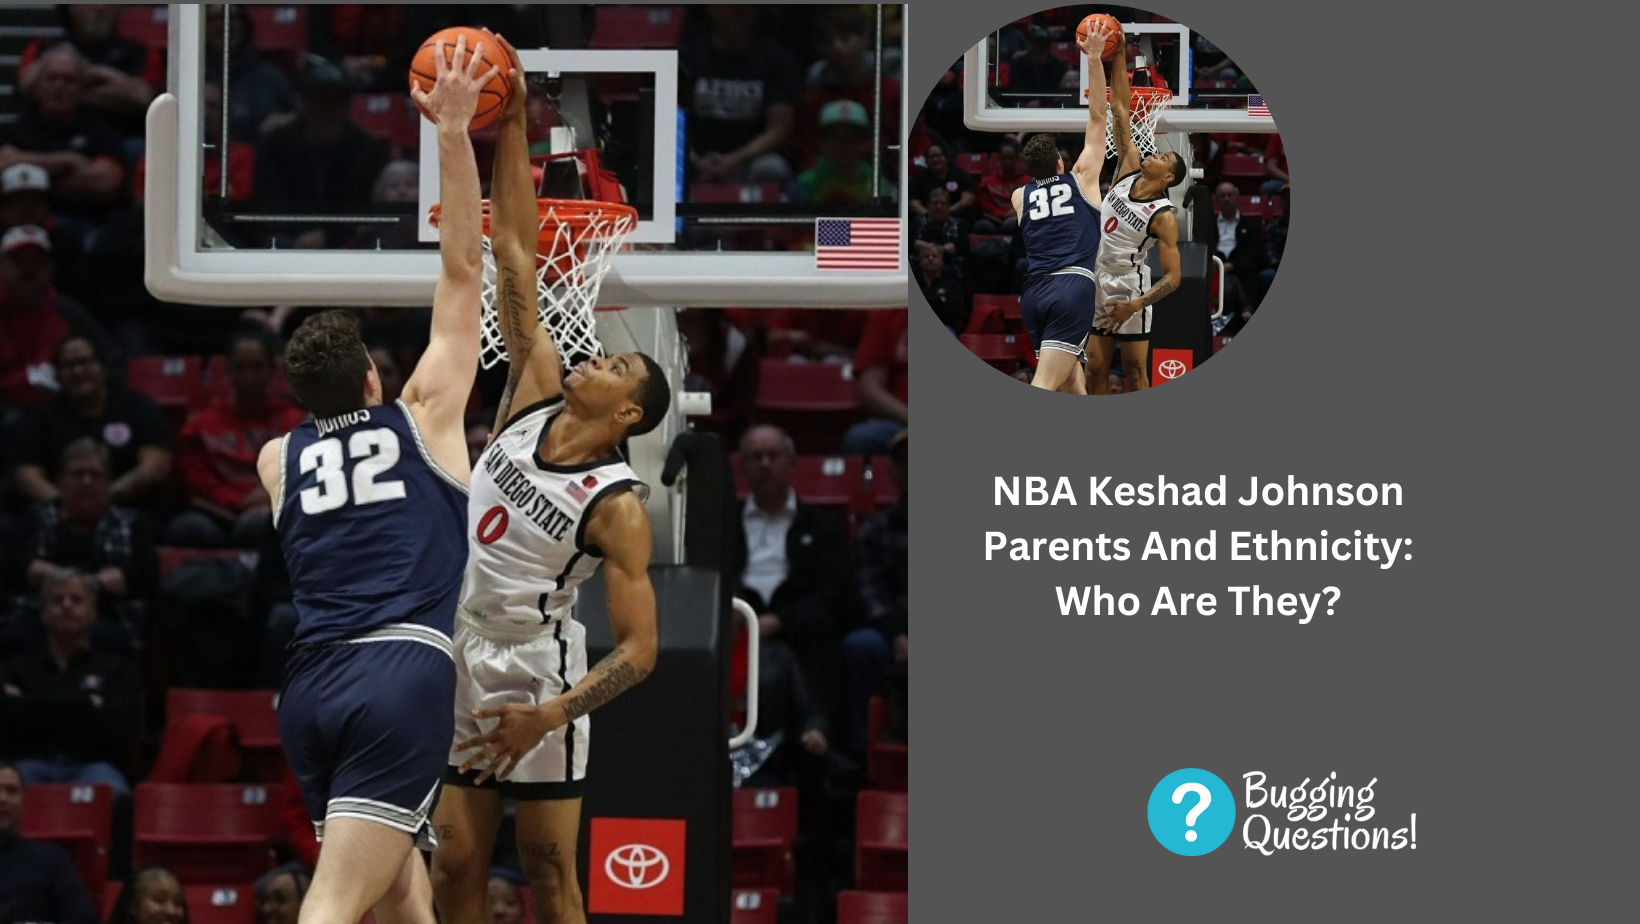 NBA Keshad Johnson Parents And Ethnicity: Who Are They?